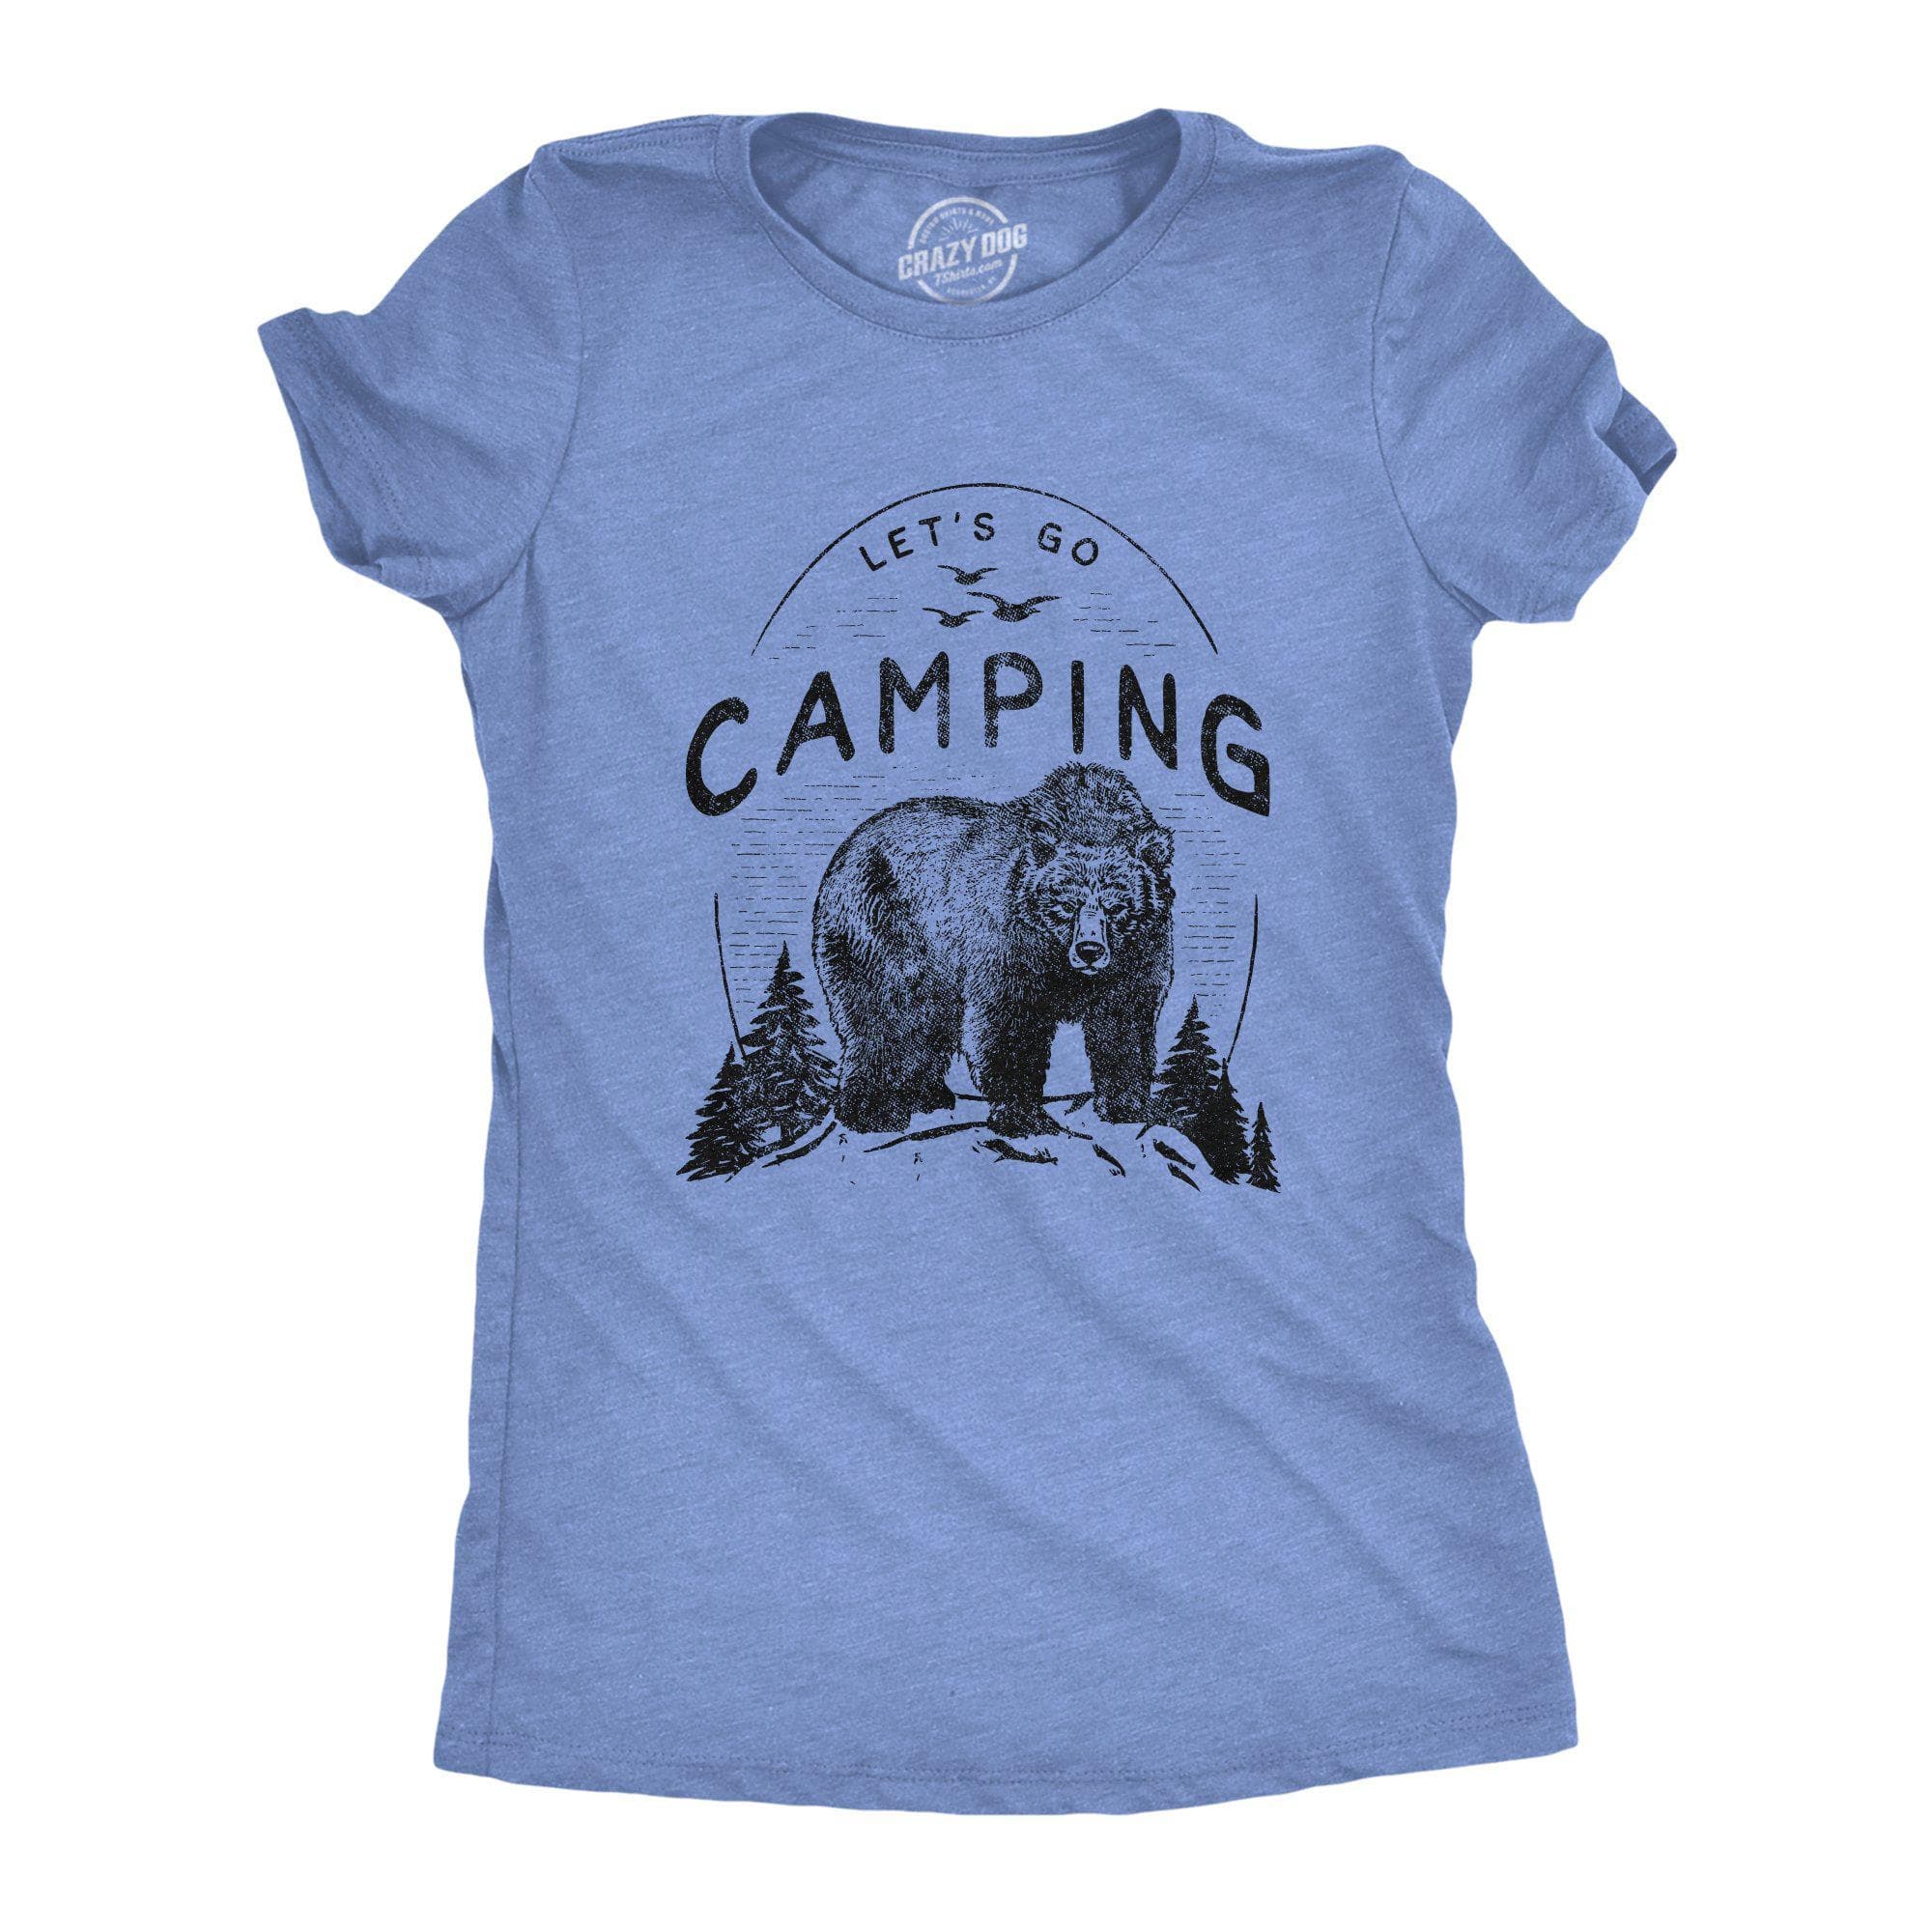 Let's Go Camping Women's Tshirt - Crazy Dog T-Shirts